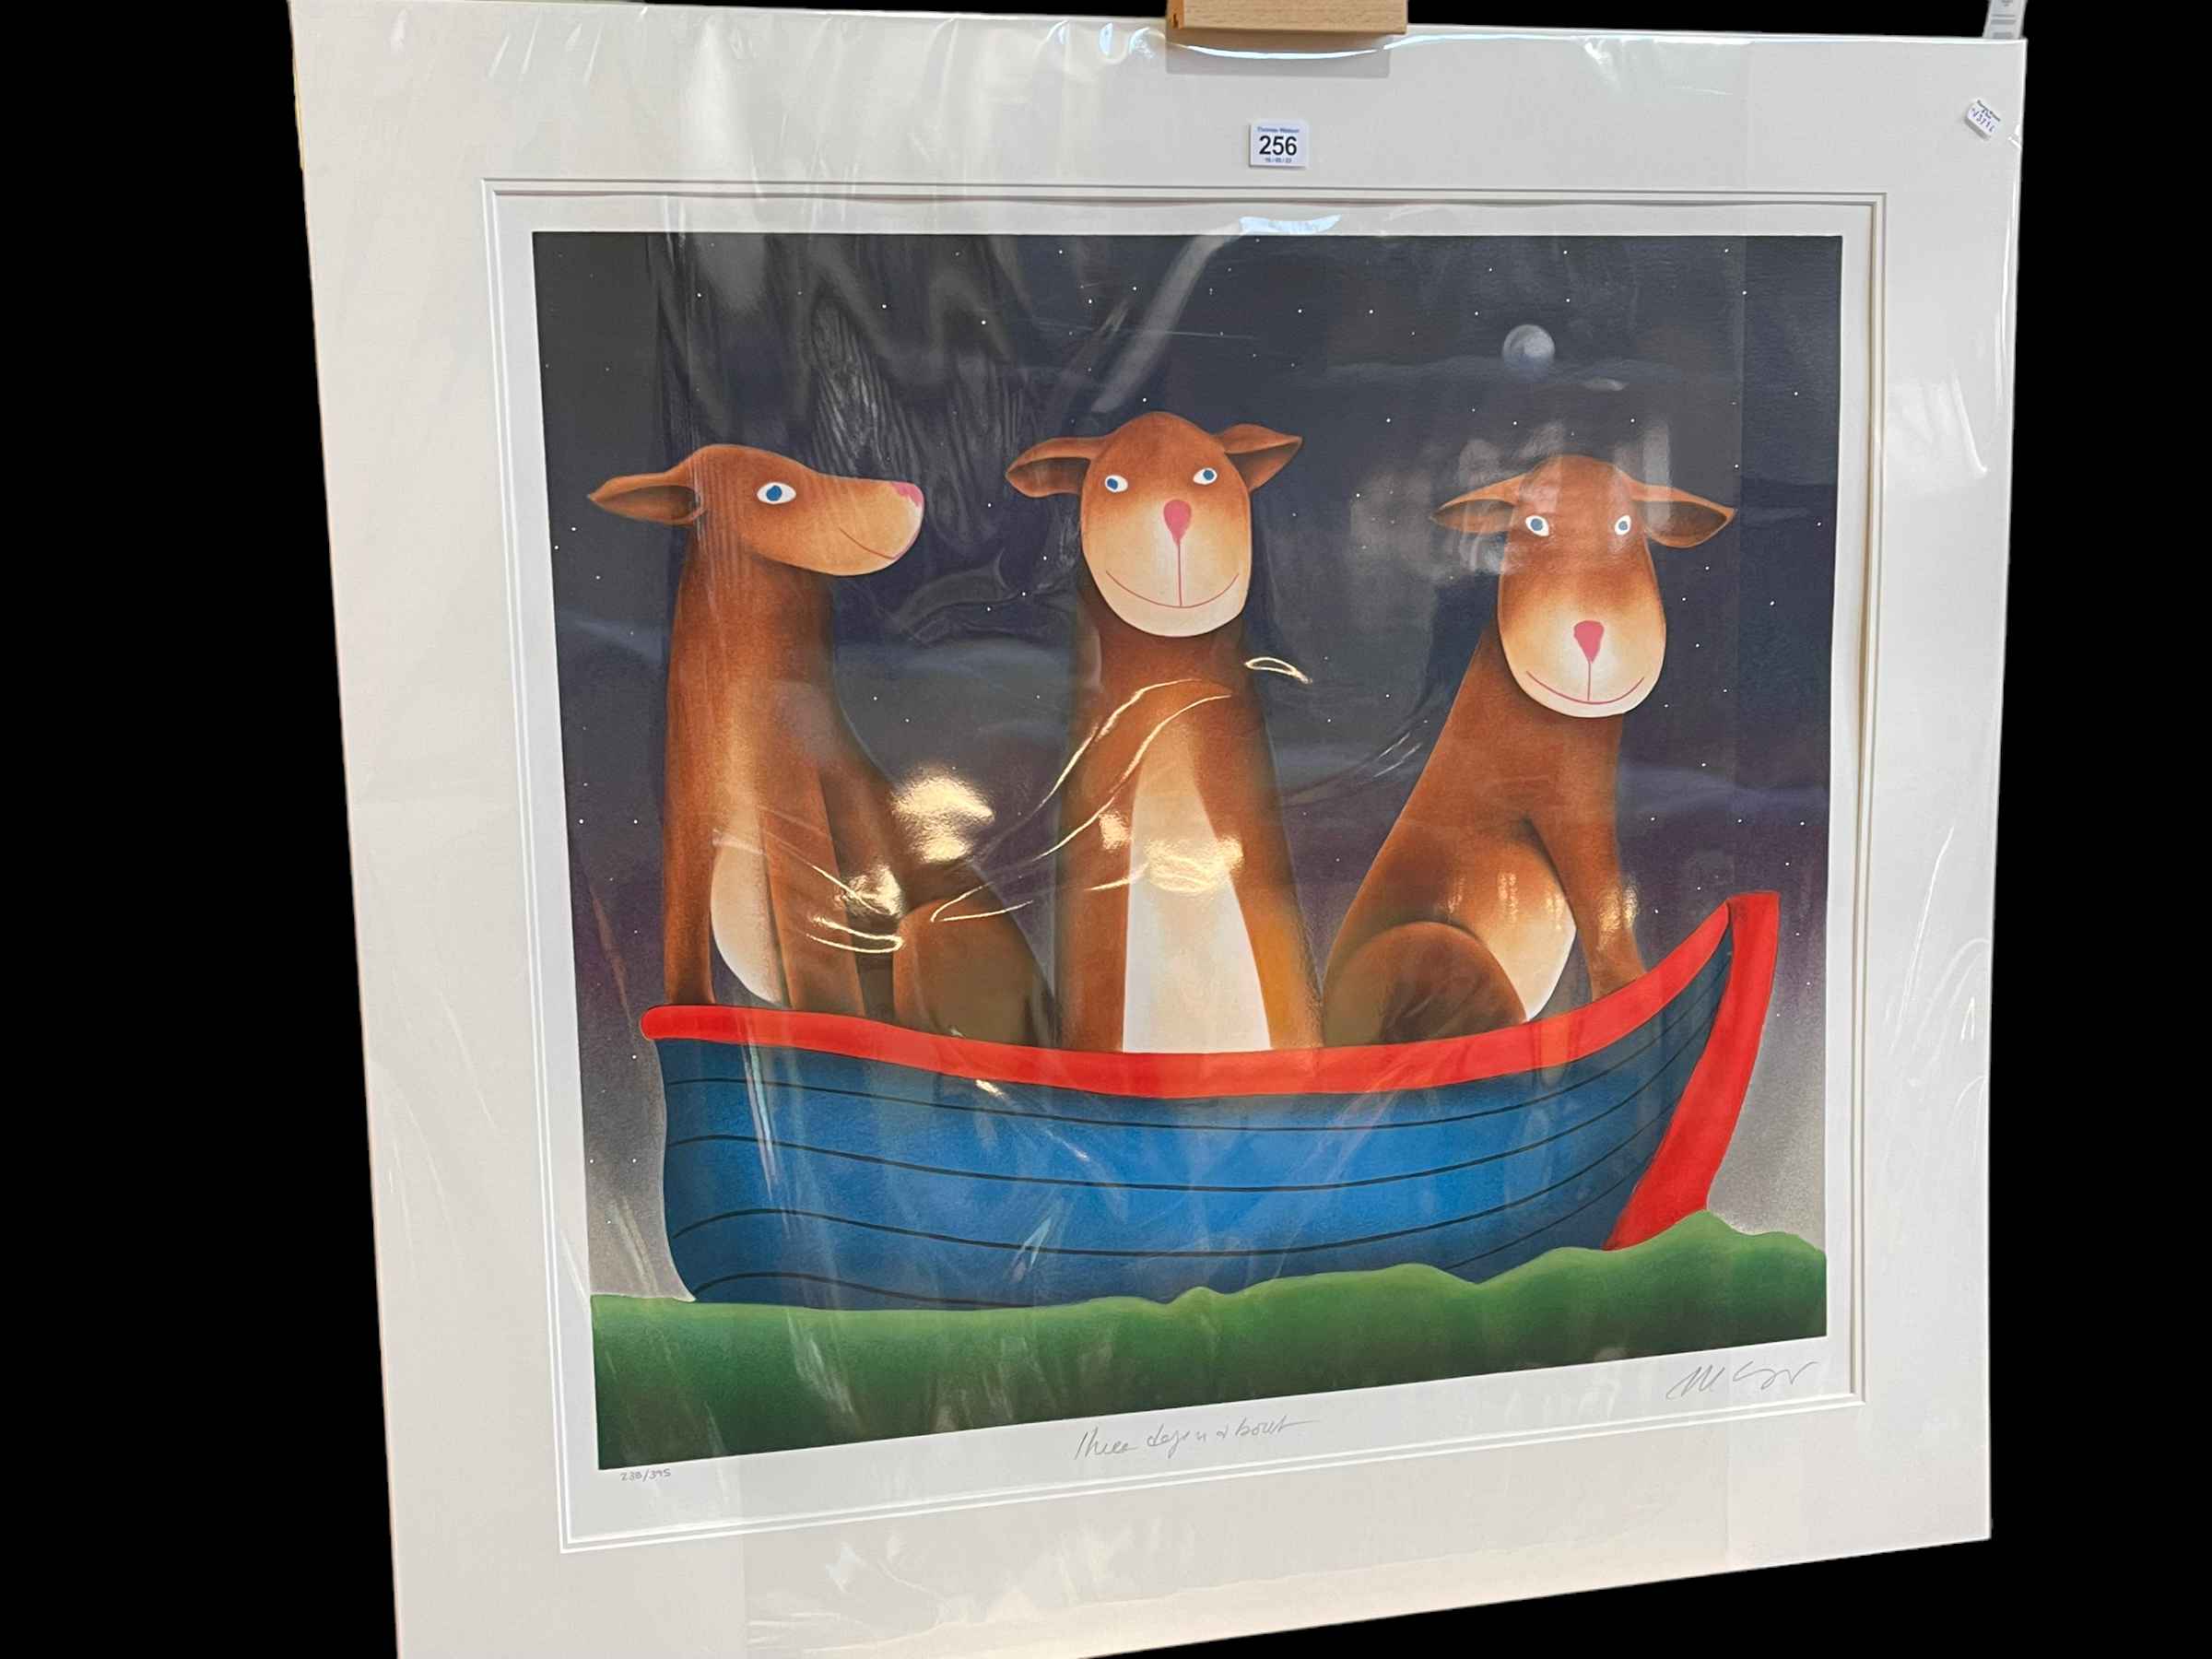 Mackenzie Thorpe, Three Dogs in a Boat, limited edition silkscreen, signed,